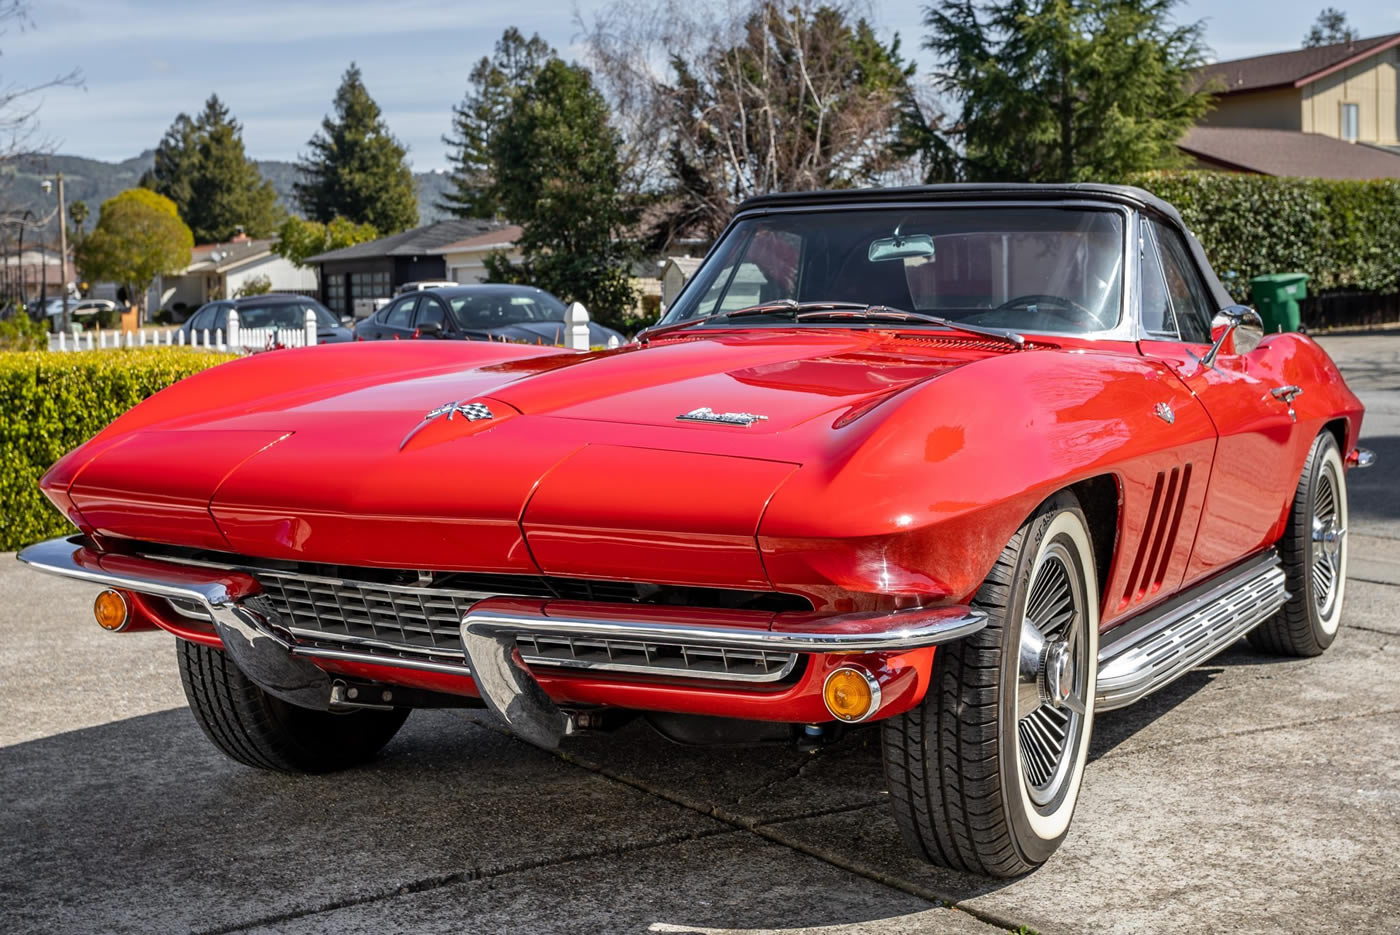 1966 Corvette Convertible in Rally Red